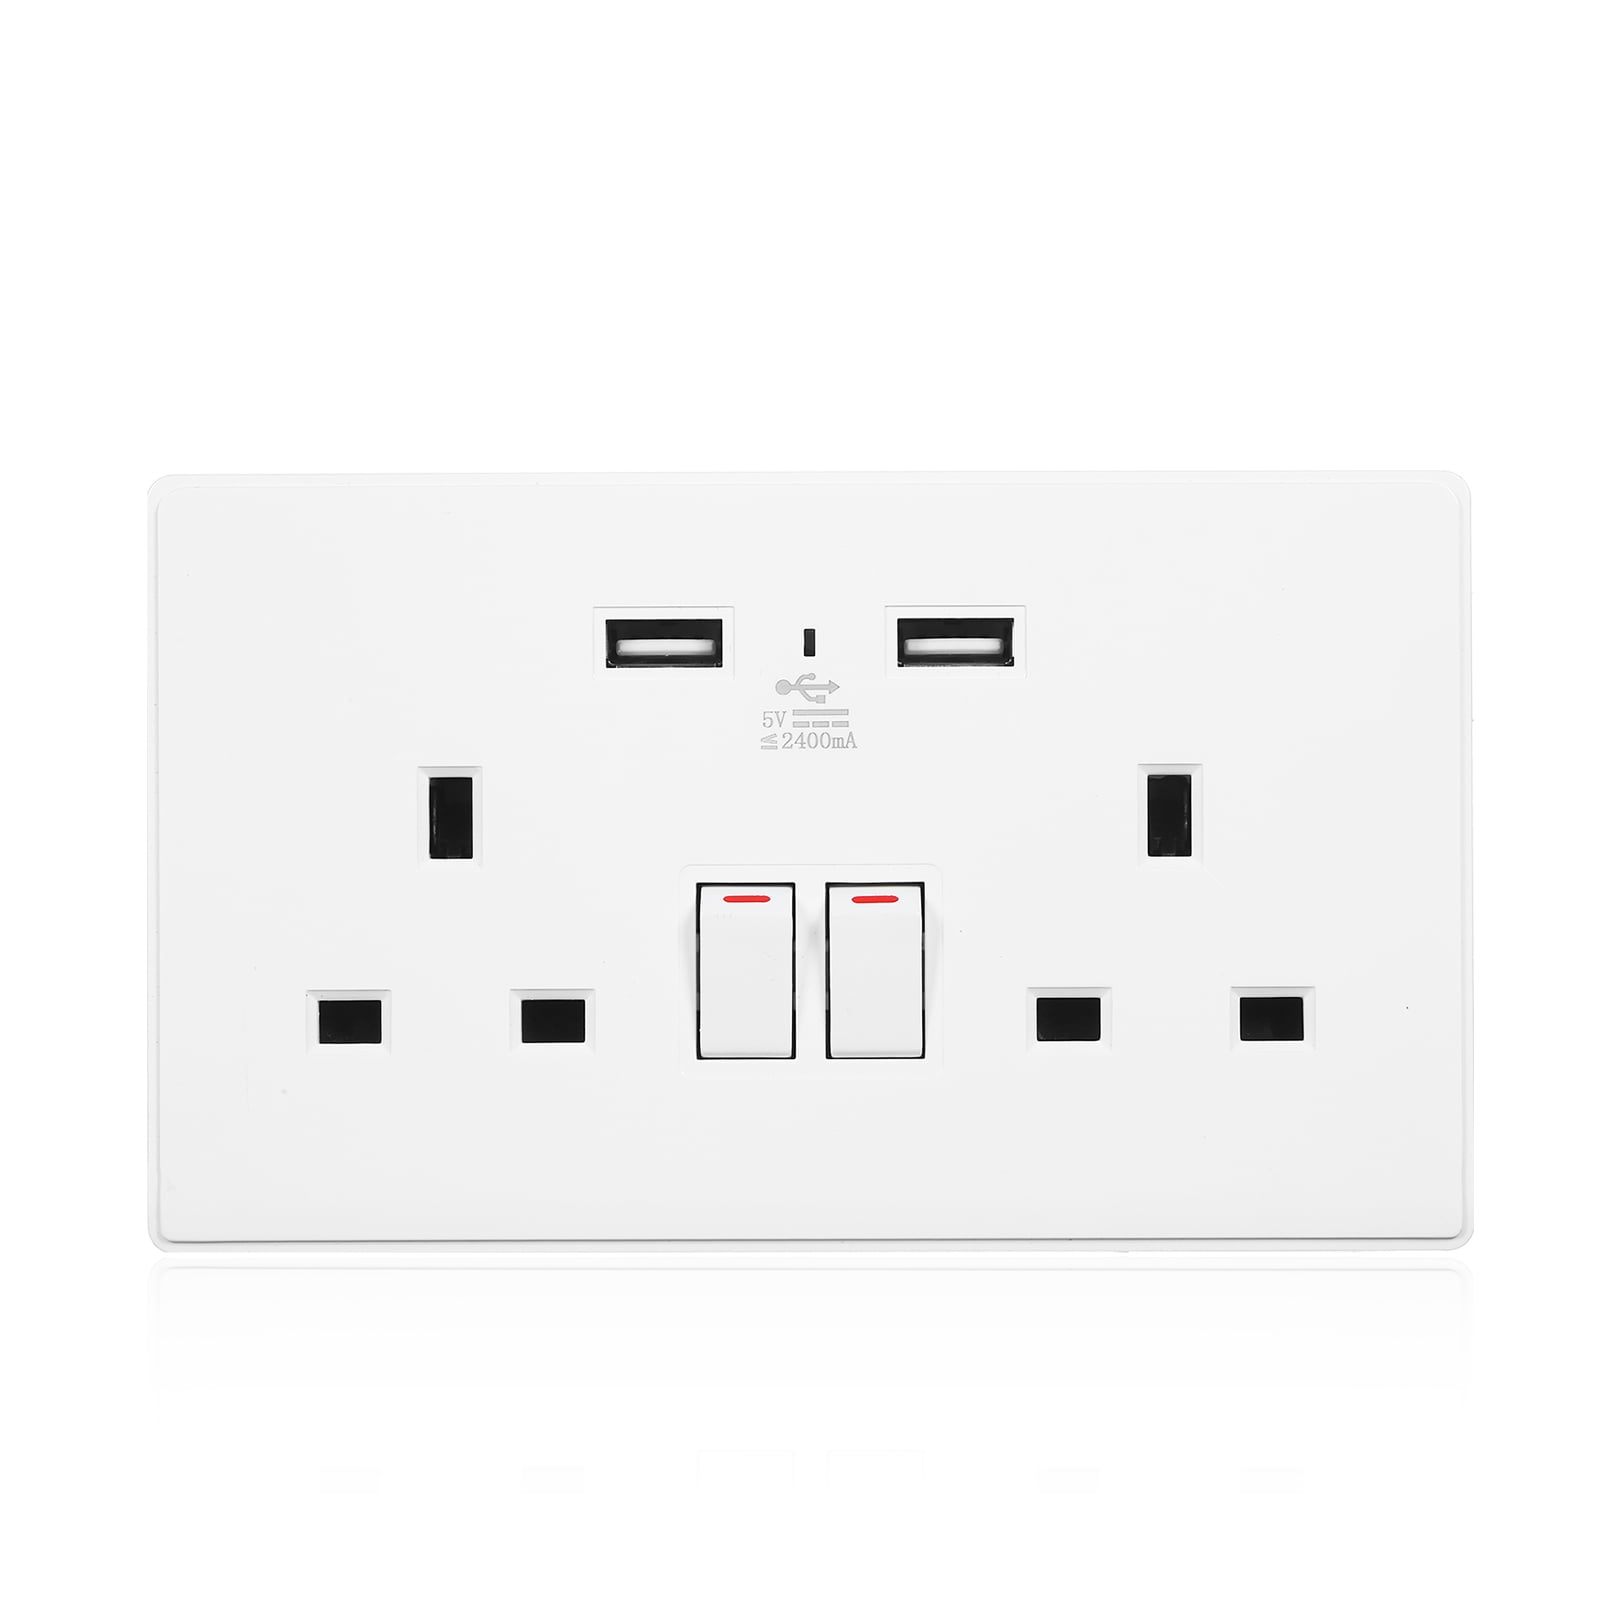 Double Wall UK Plug Socket 2 Gang 13A with 2 USB Charger Port Outlet Plates.